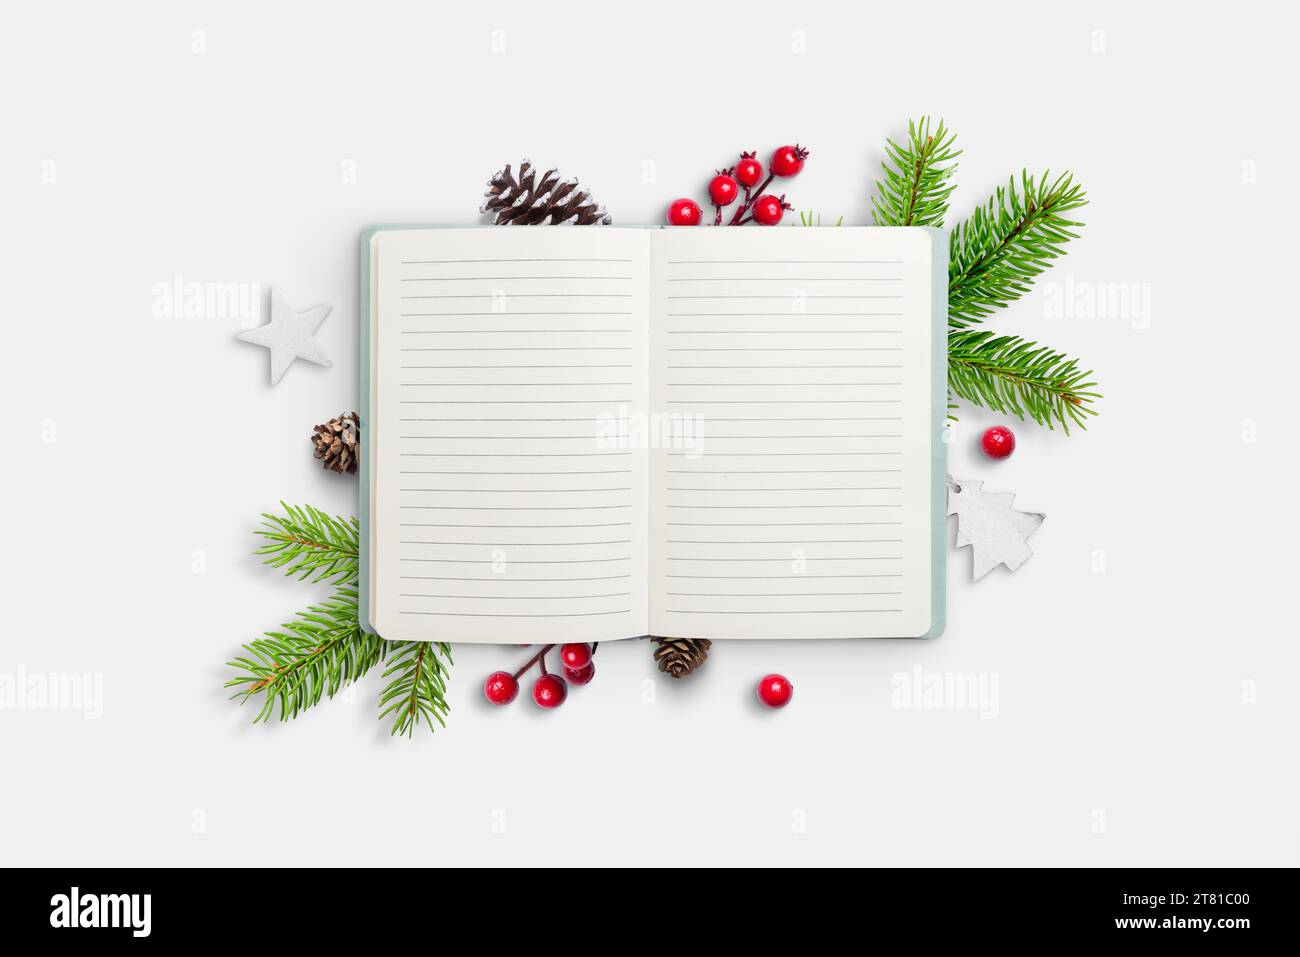 Empty notebook with text space. Festive Christmas decorations in the background. Copy space for holiday greetings or messages Stock Photo